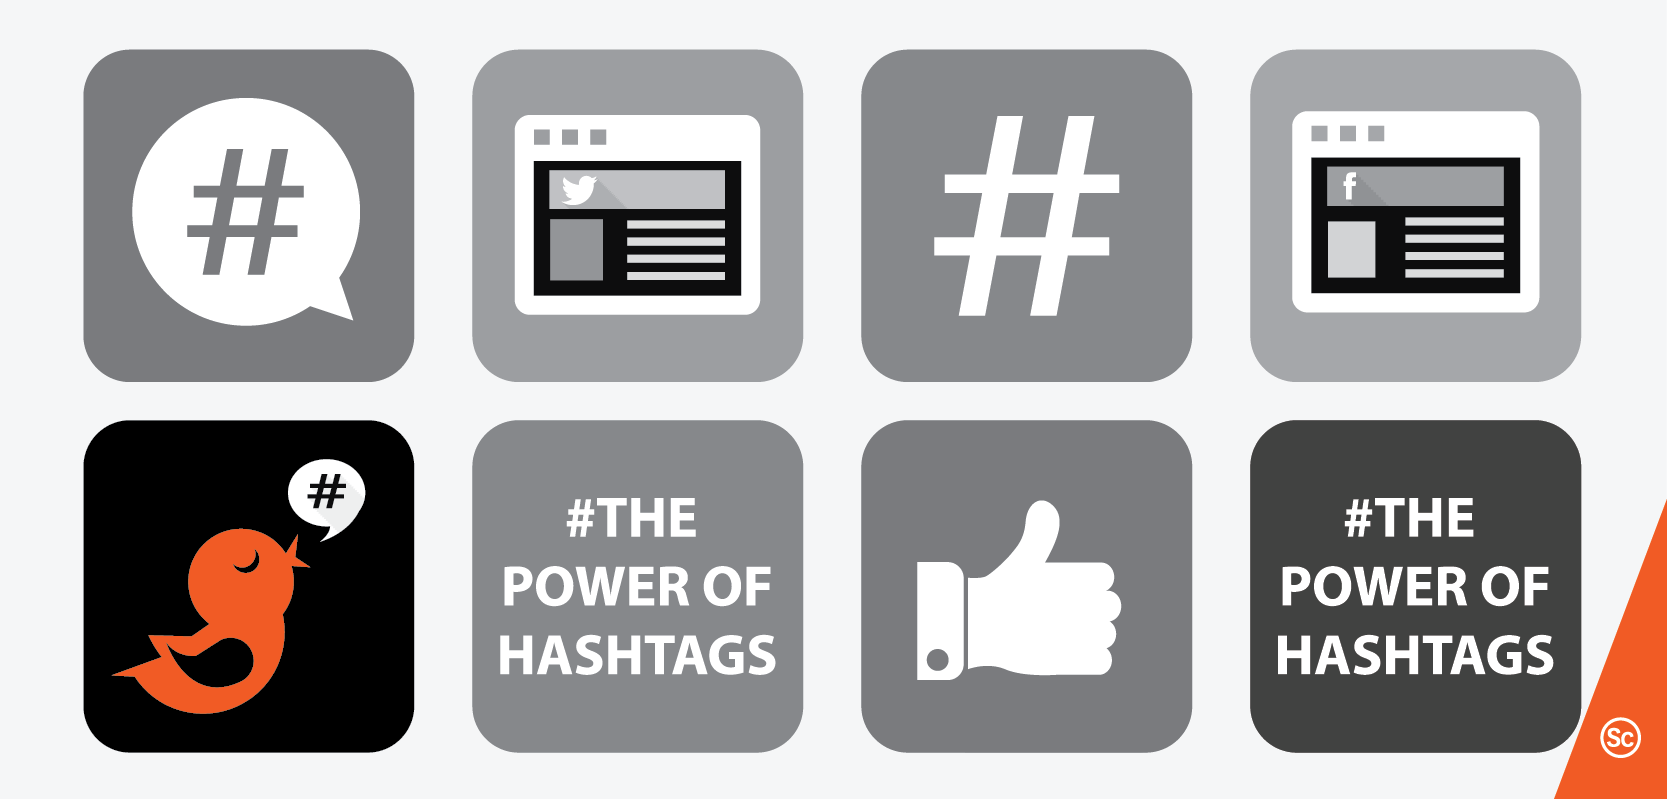 How to make the best of your event hashtag